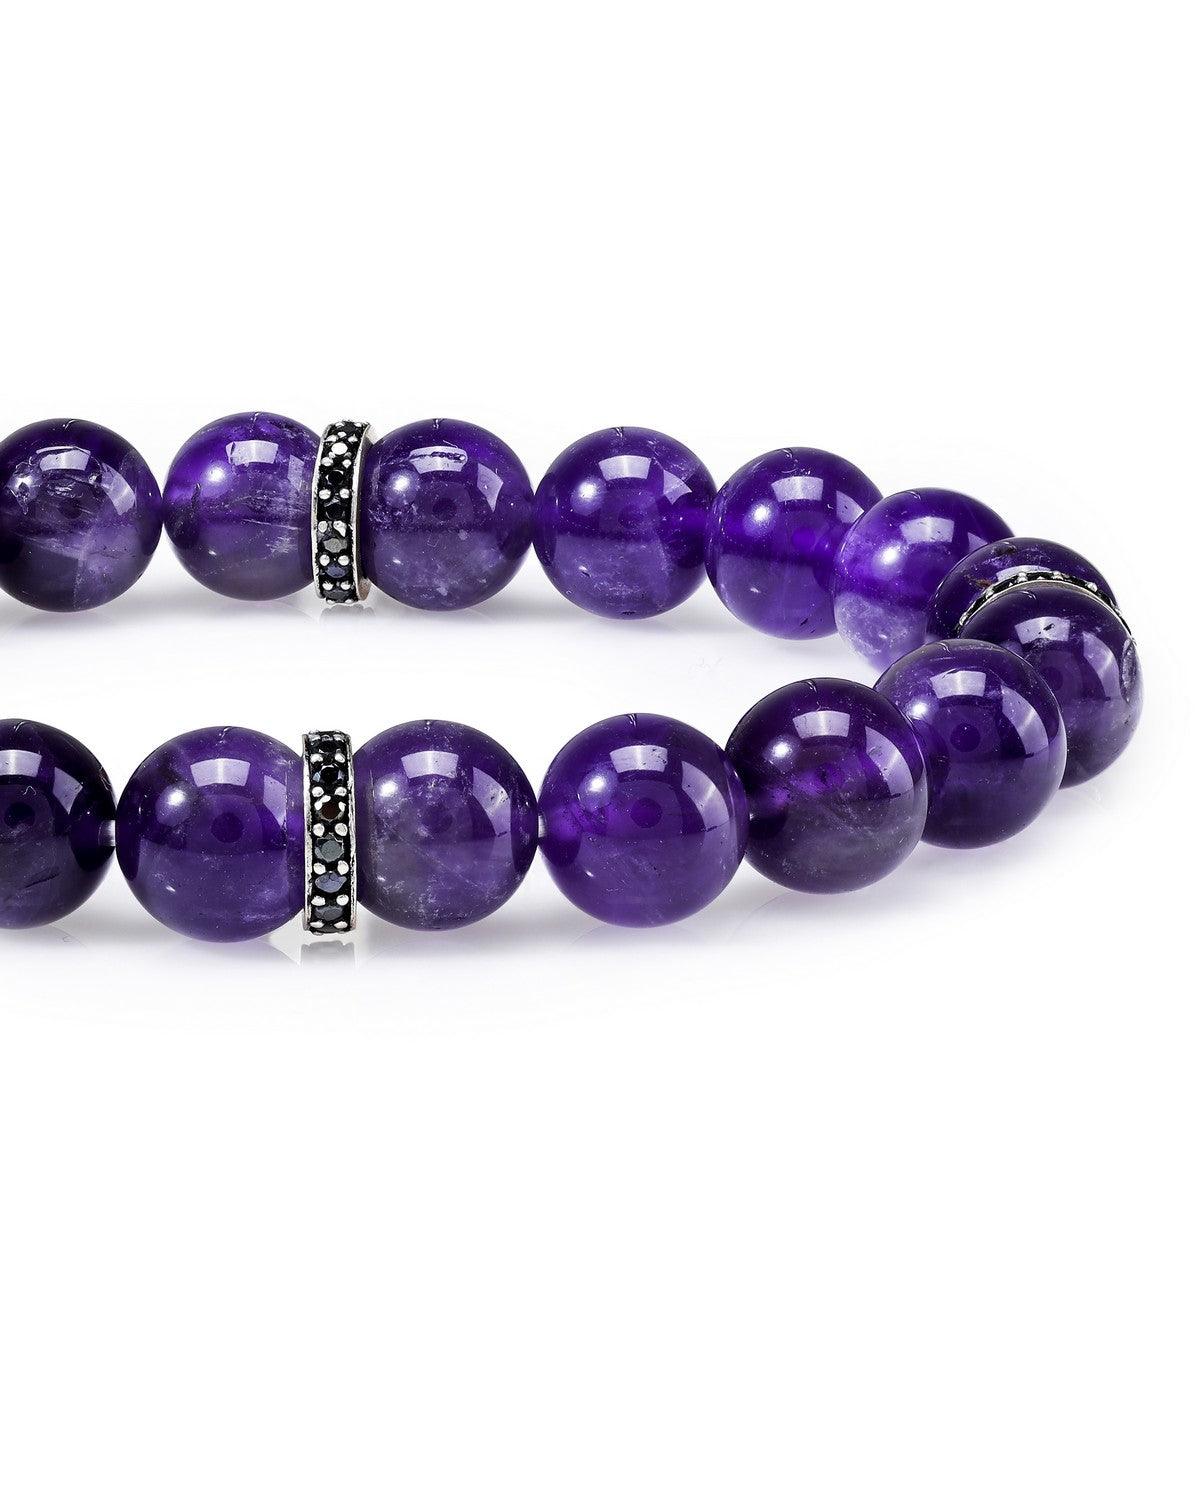 Amethyst Black Spinel 925 Sterling Silver Stretchable Beads Bracelet 7" For Men's Jewelry - YoTreasure